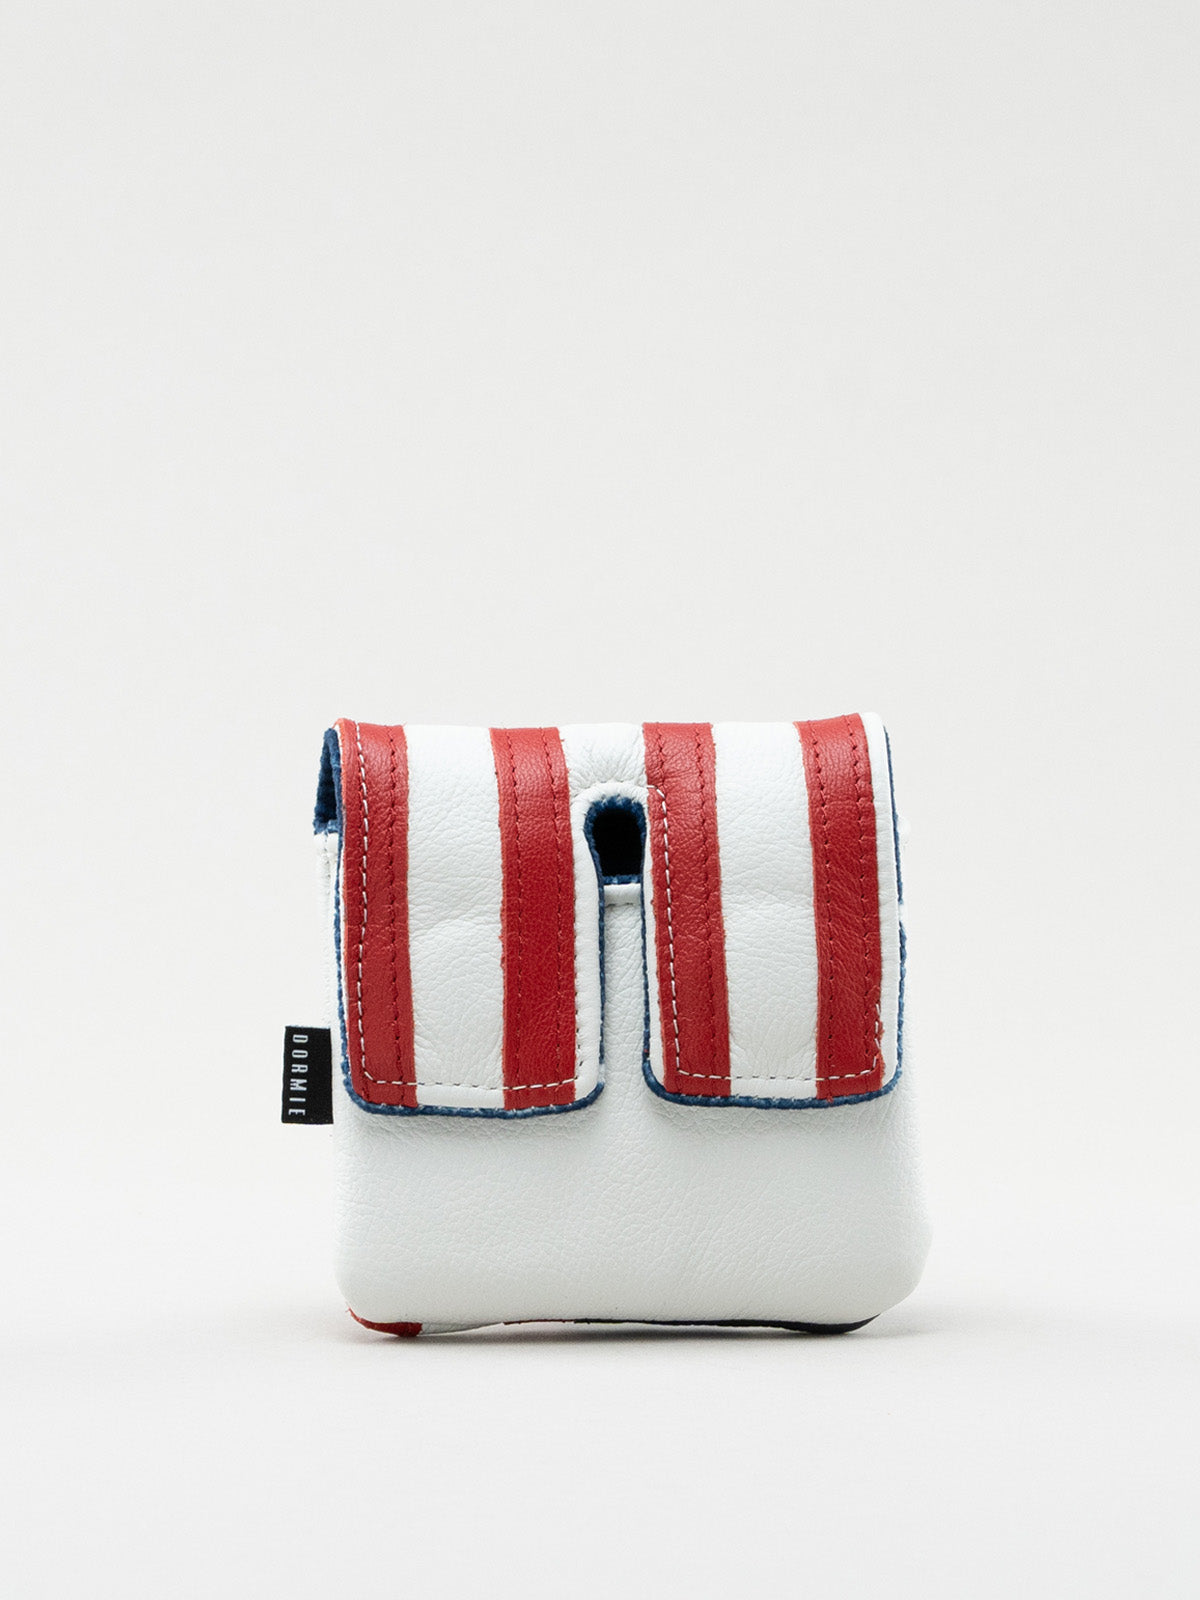 Dormie USA Flag Center Shafted Mallet Putter Headcover